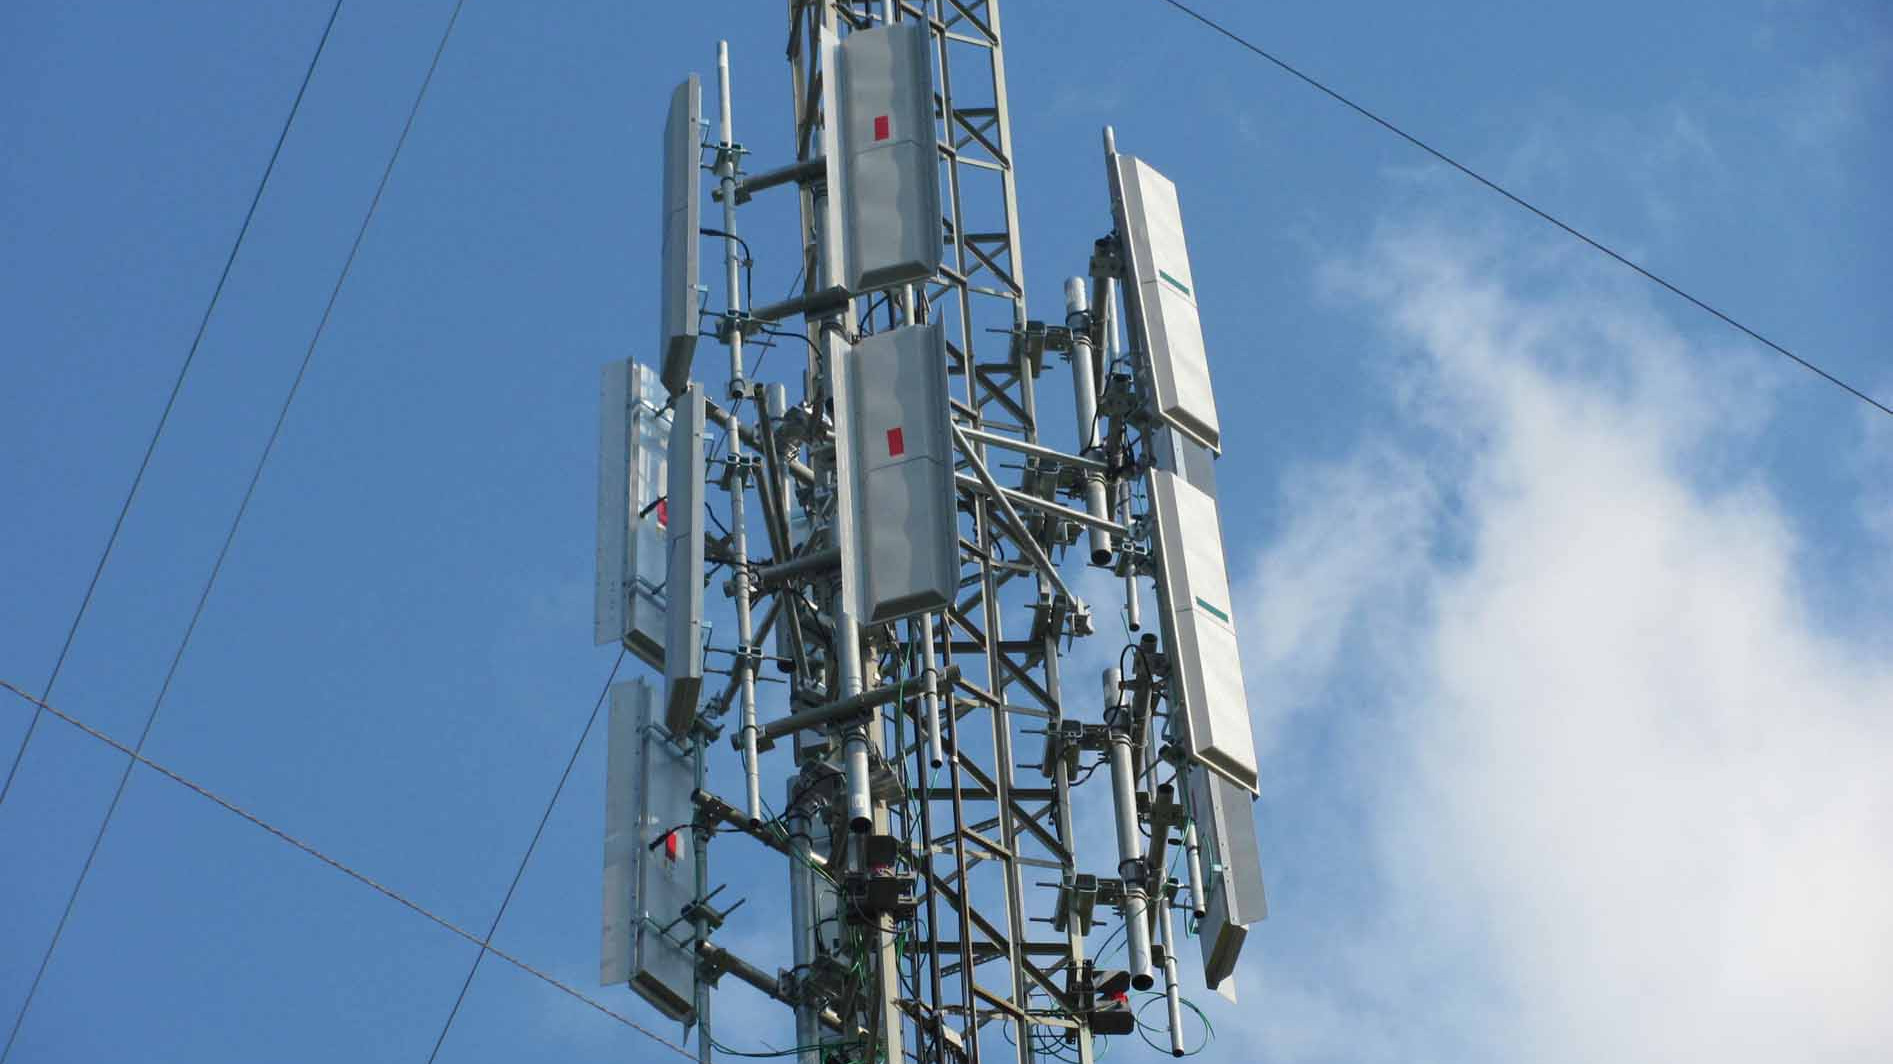 Picture of one of Gogo's internet towers